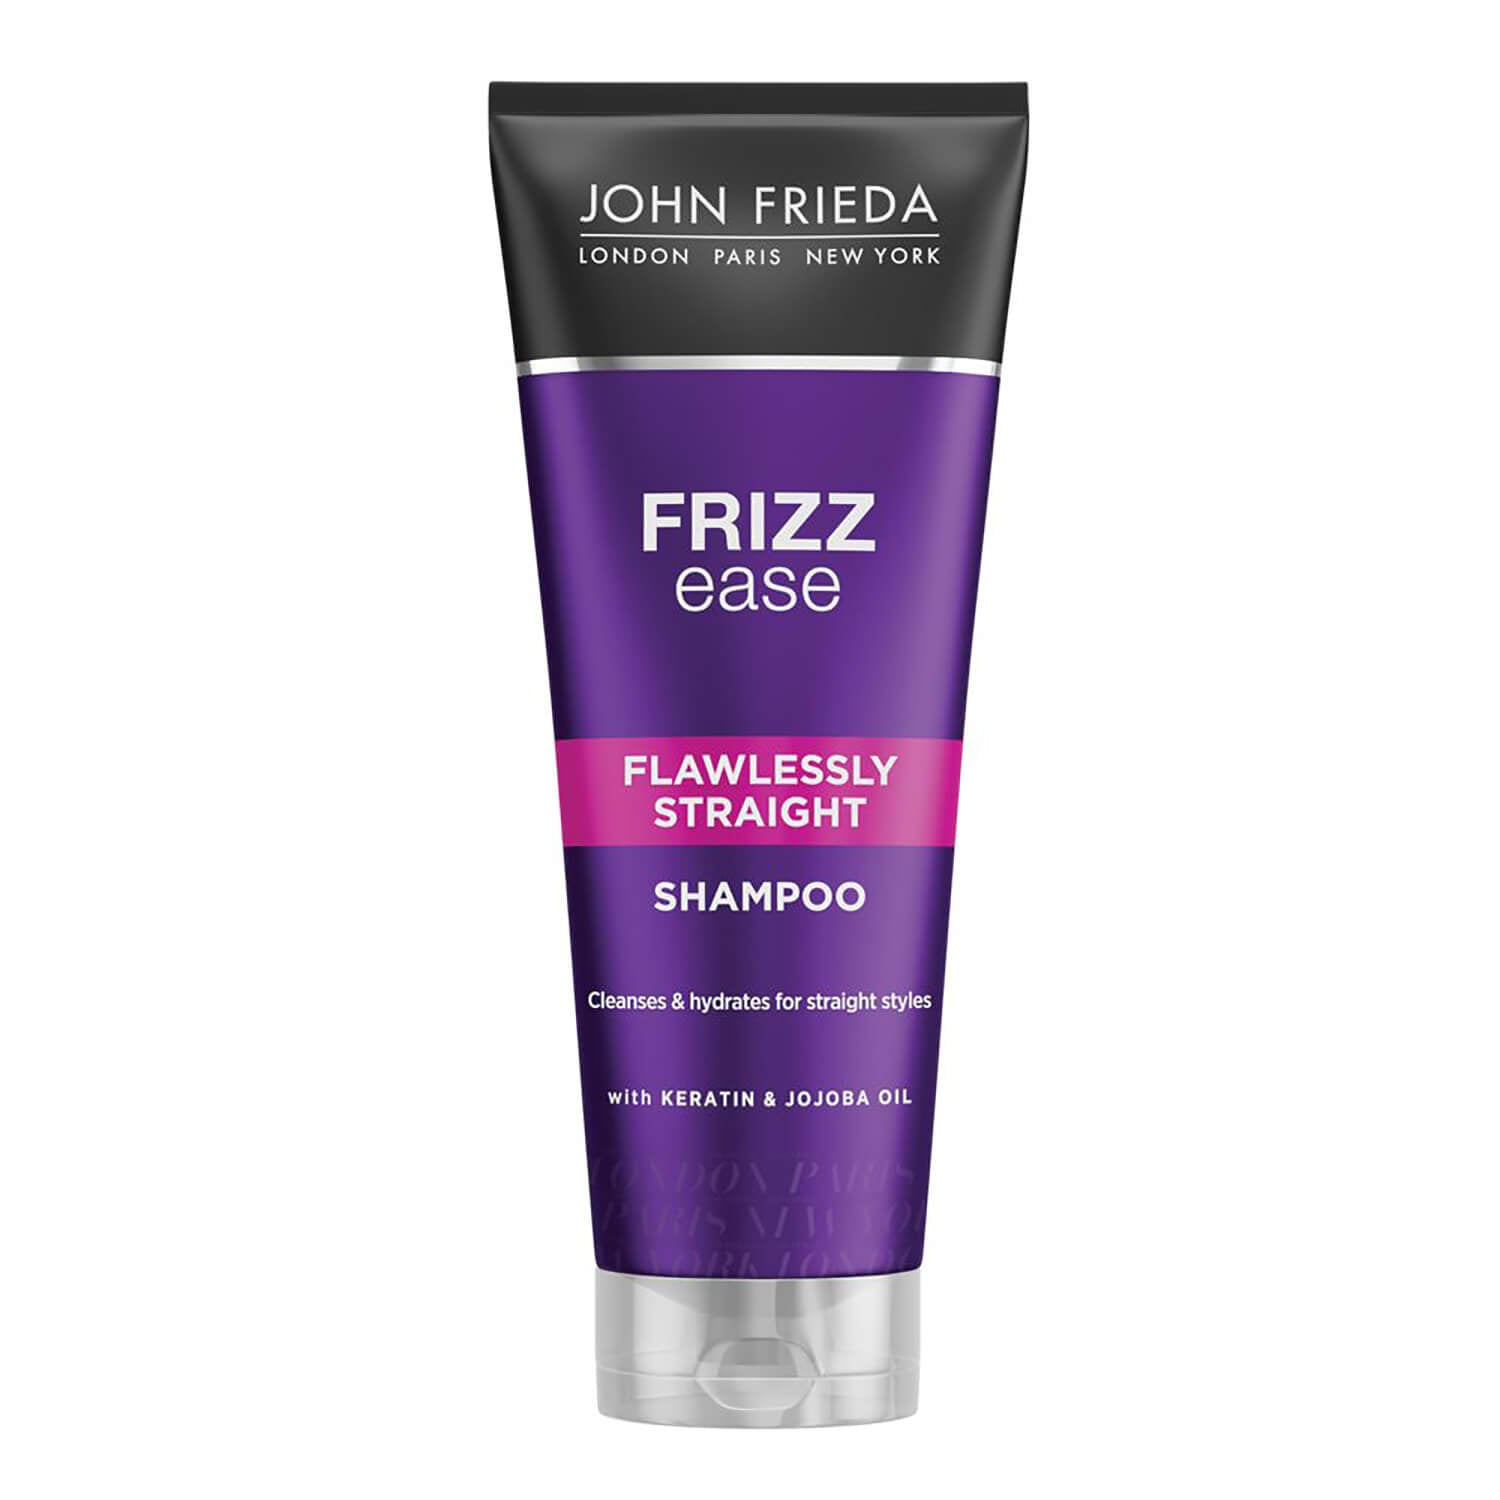 John Frieda Frizz Ease Flawlessly Straight Shampoo 1 Shaws Department Stores